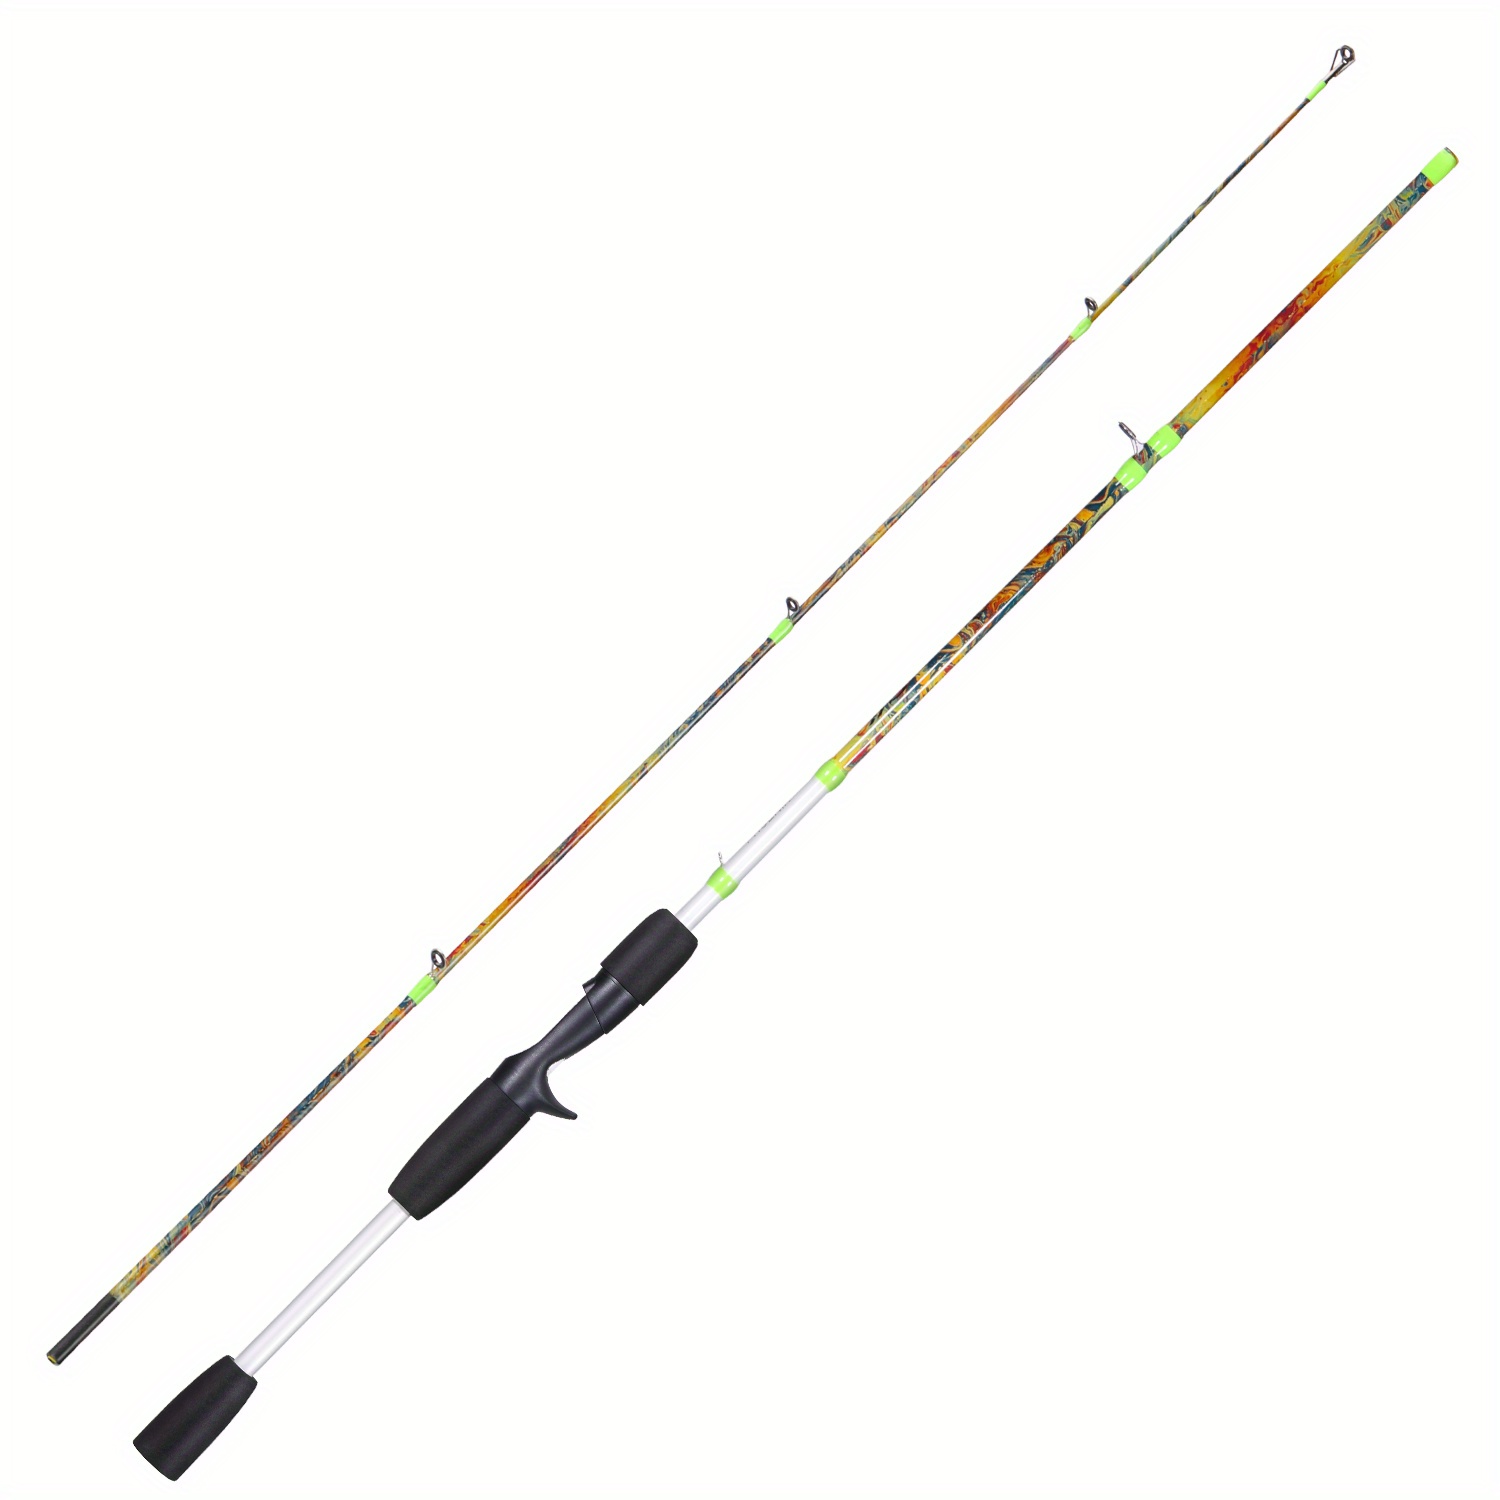 Sougayilang 1pc 2-section Fishing Rod, 168cm/5.5ft Color-Painted Rod, Fast  Action ML Power Fishing Pole, Spinning & Casting Rod For Freshwater